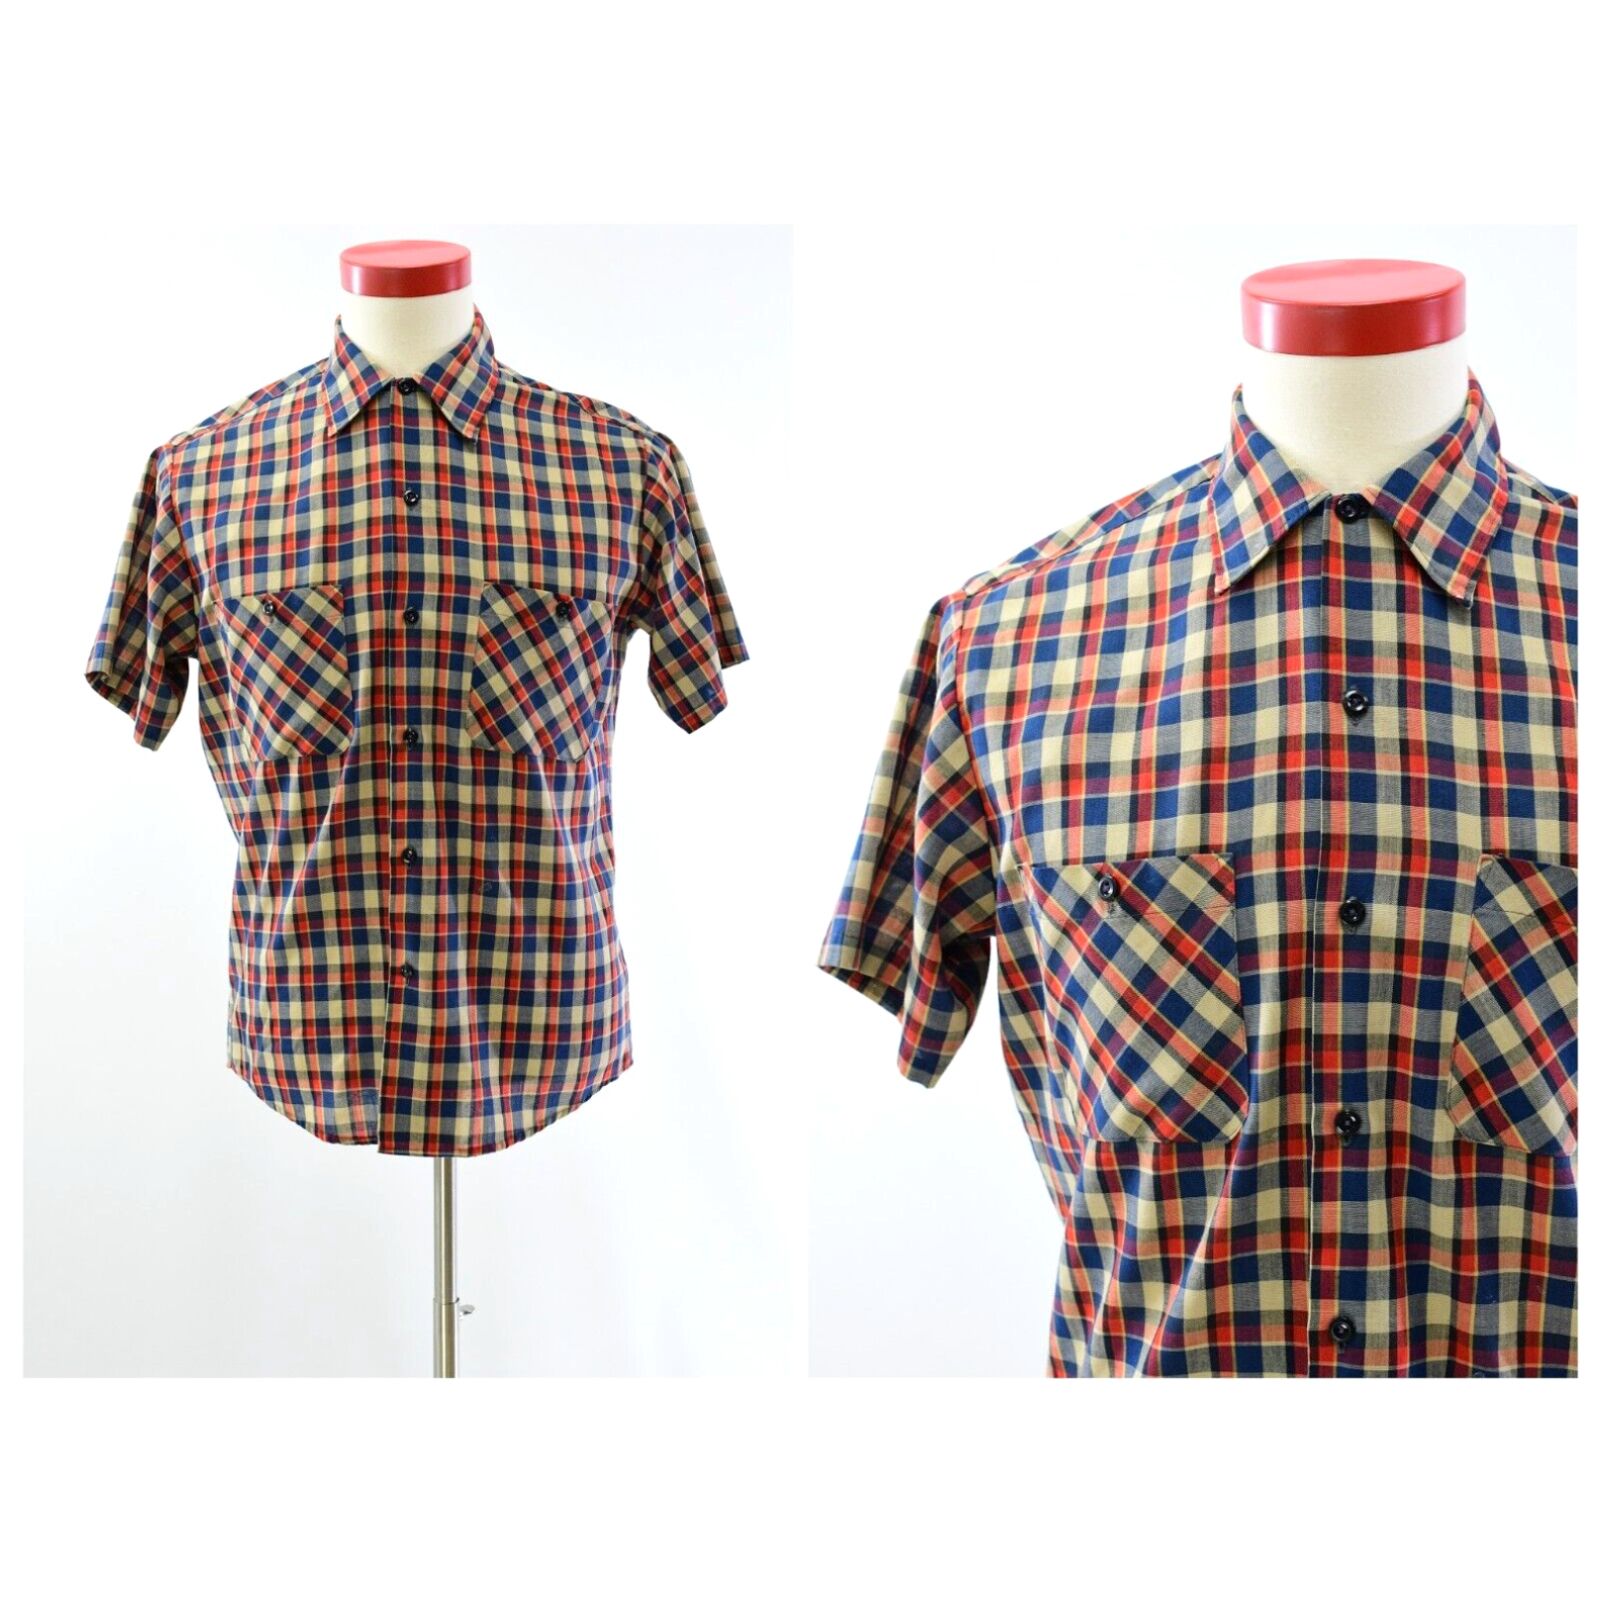 Sears 60s Vintage Mens M Checkered Short Sleeve Shirt Sears Button Front Size US M / EU 48-50 / 2 - 1 Preview